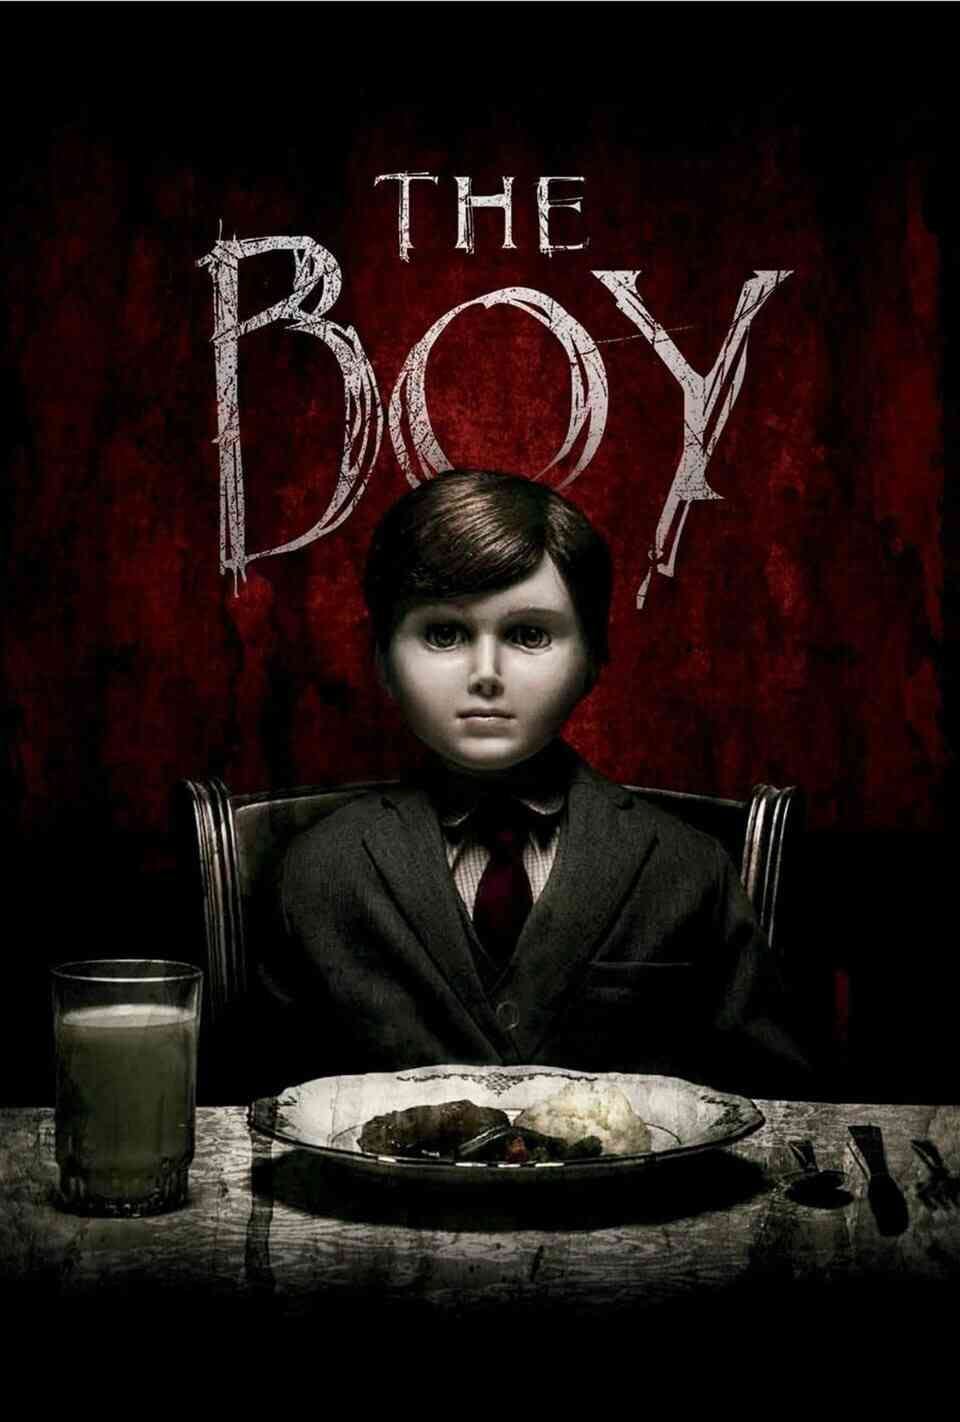 Read The Boy screenplay (poster)